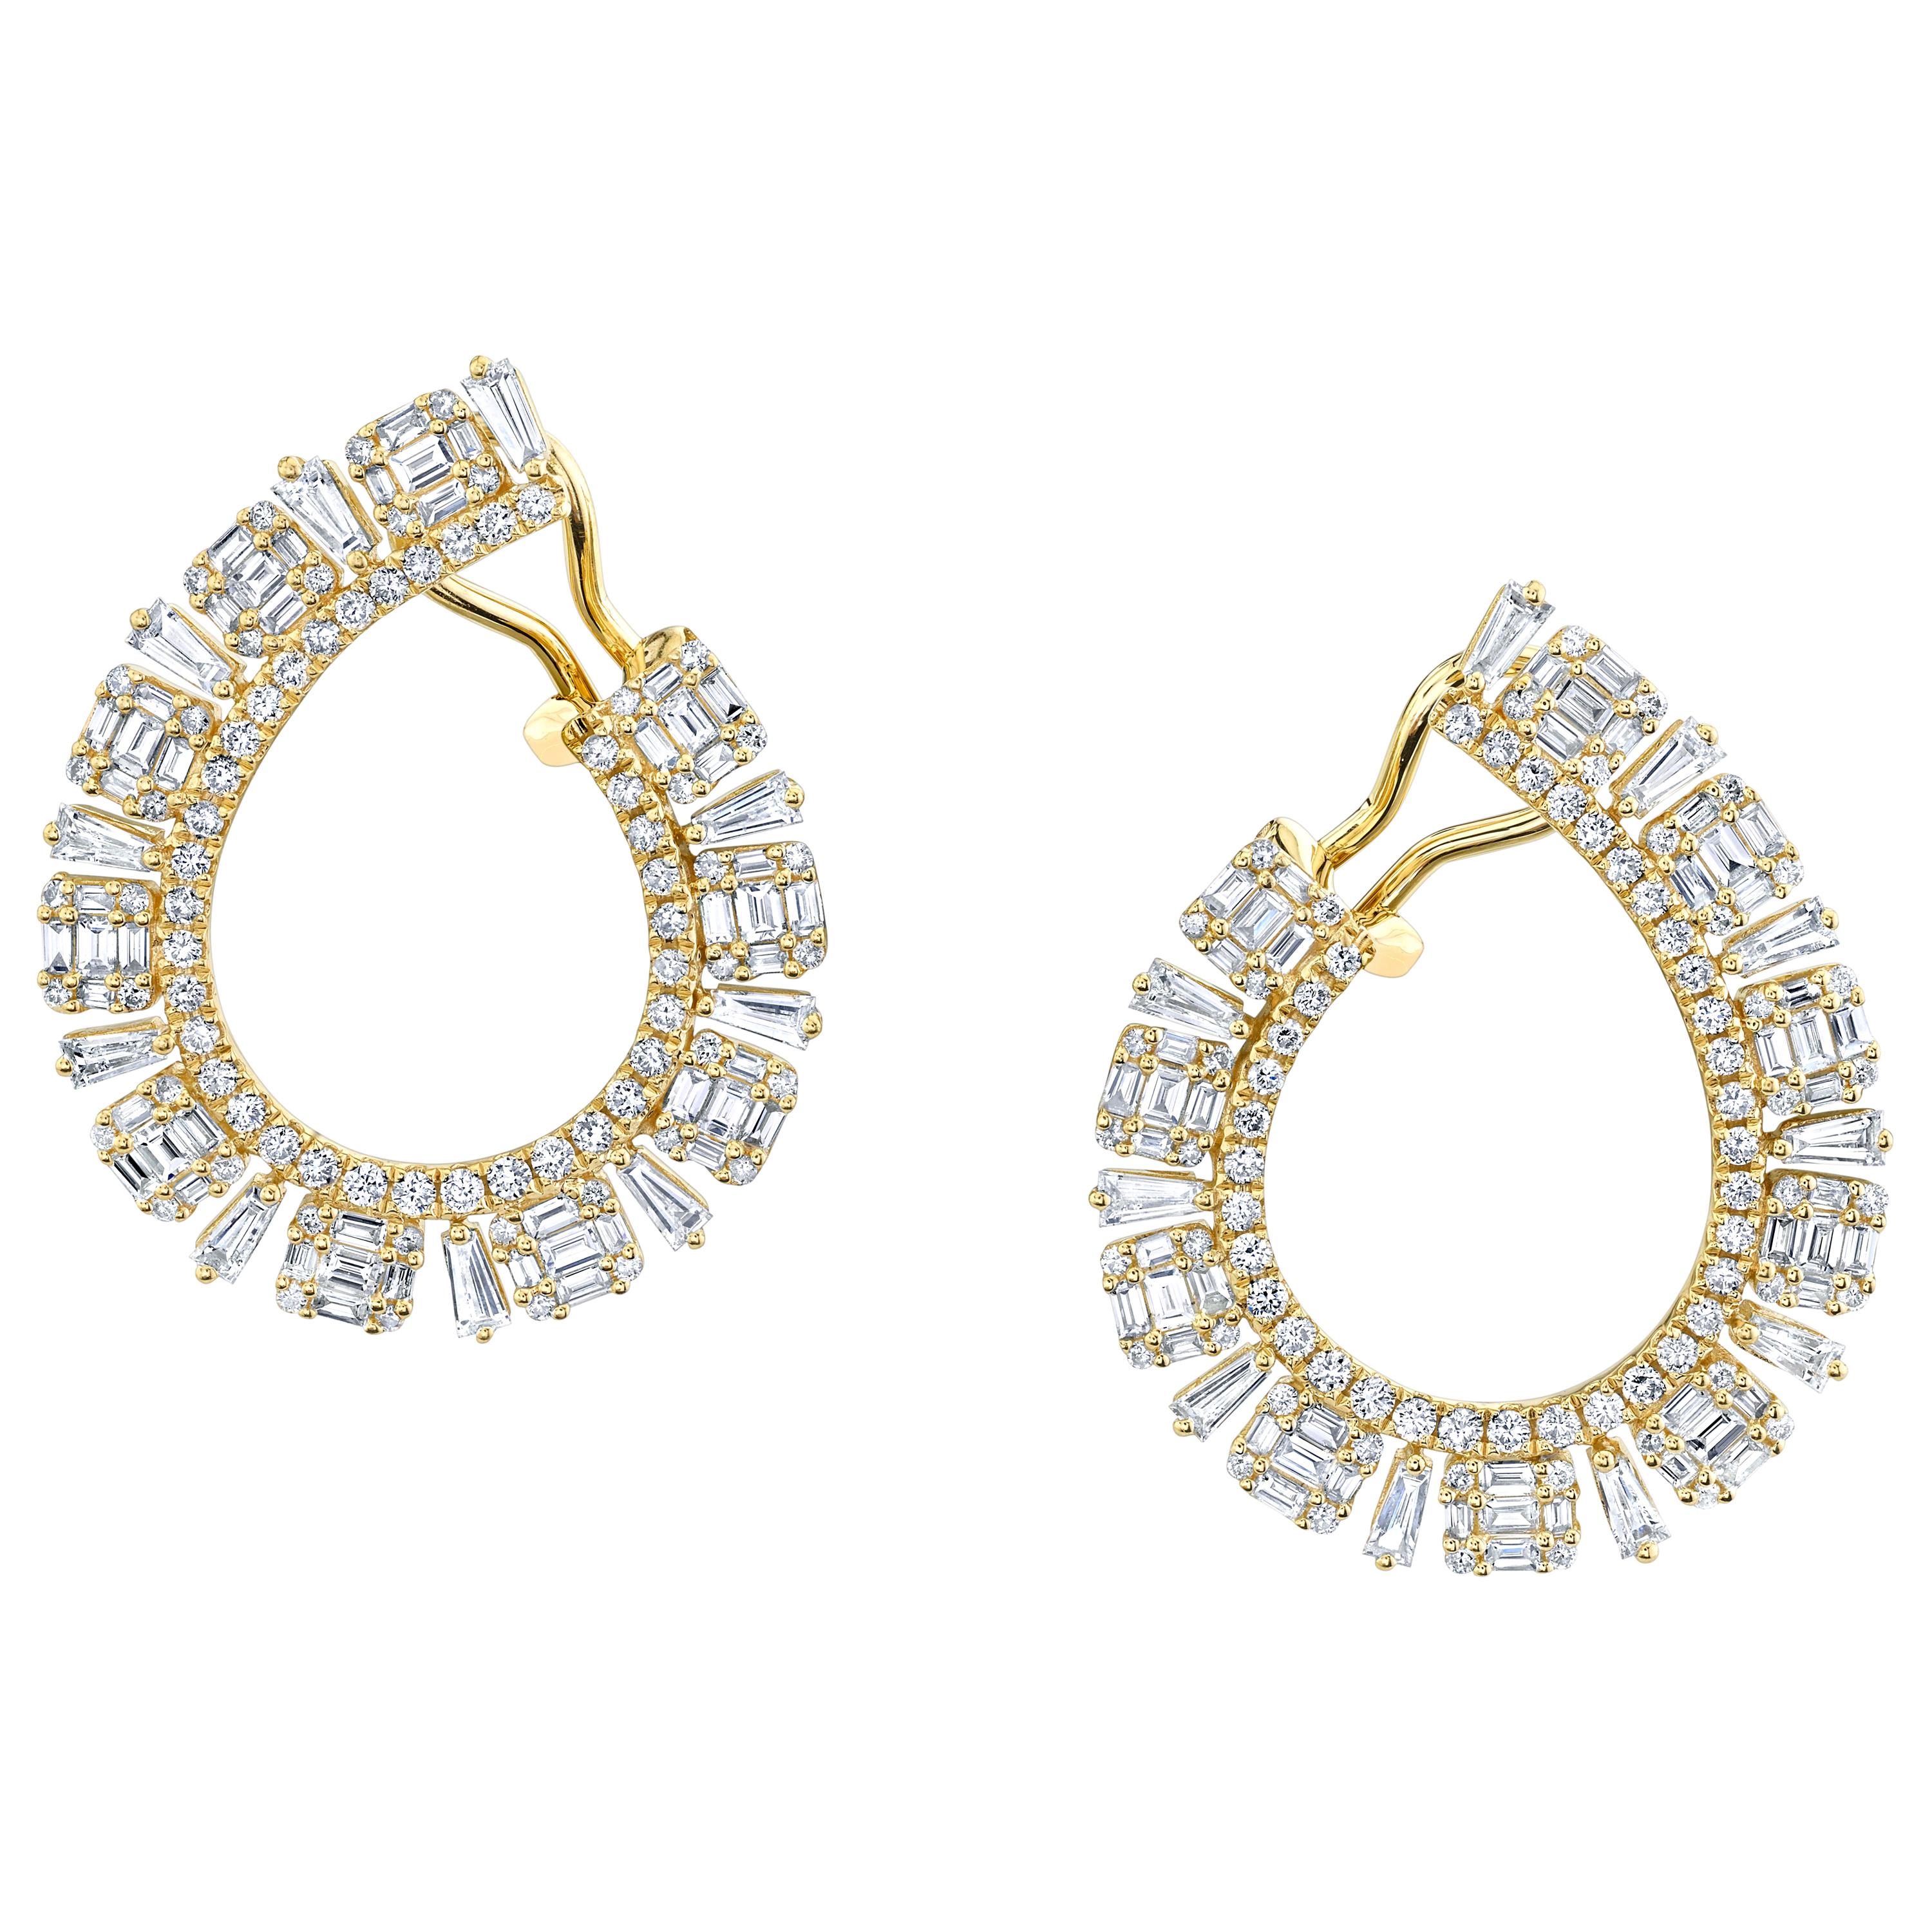 Baguette and Round Diamond Hoop Earrings in Yellow Gold, 3.12 Carats Total